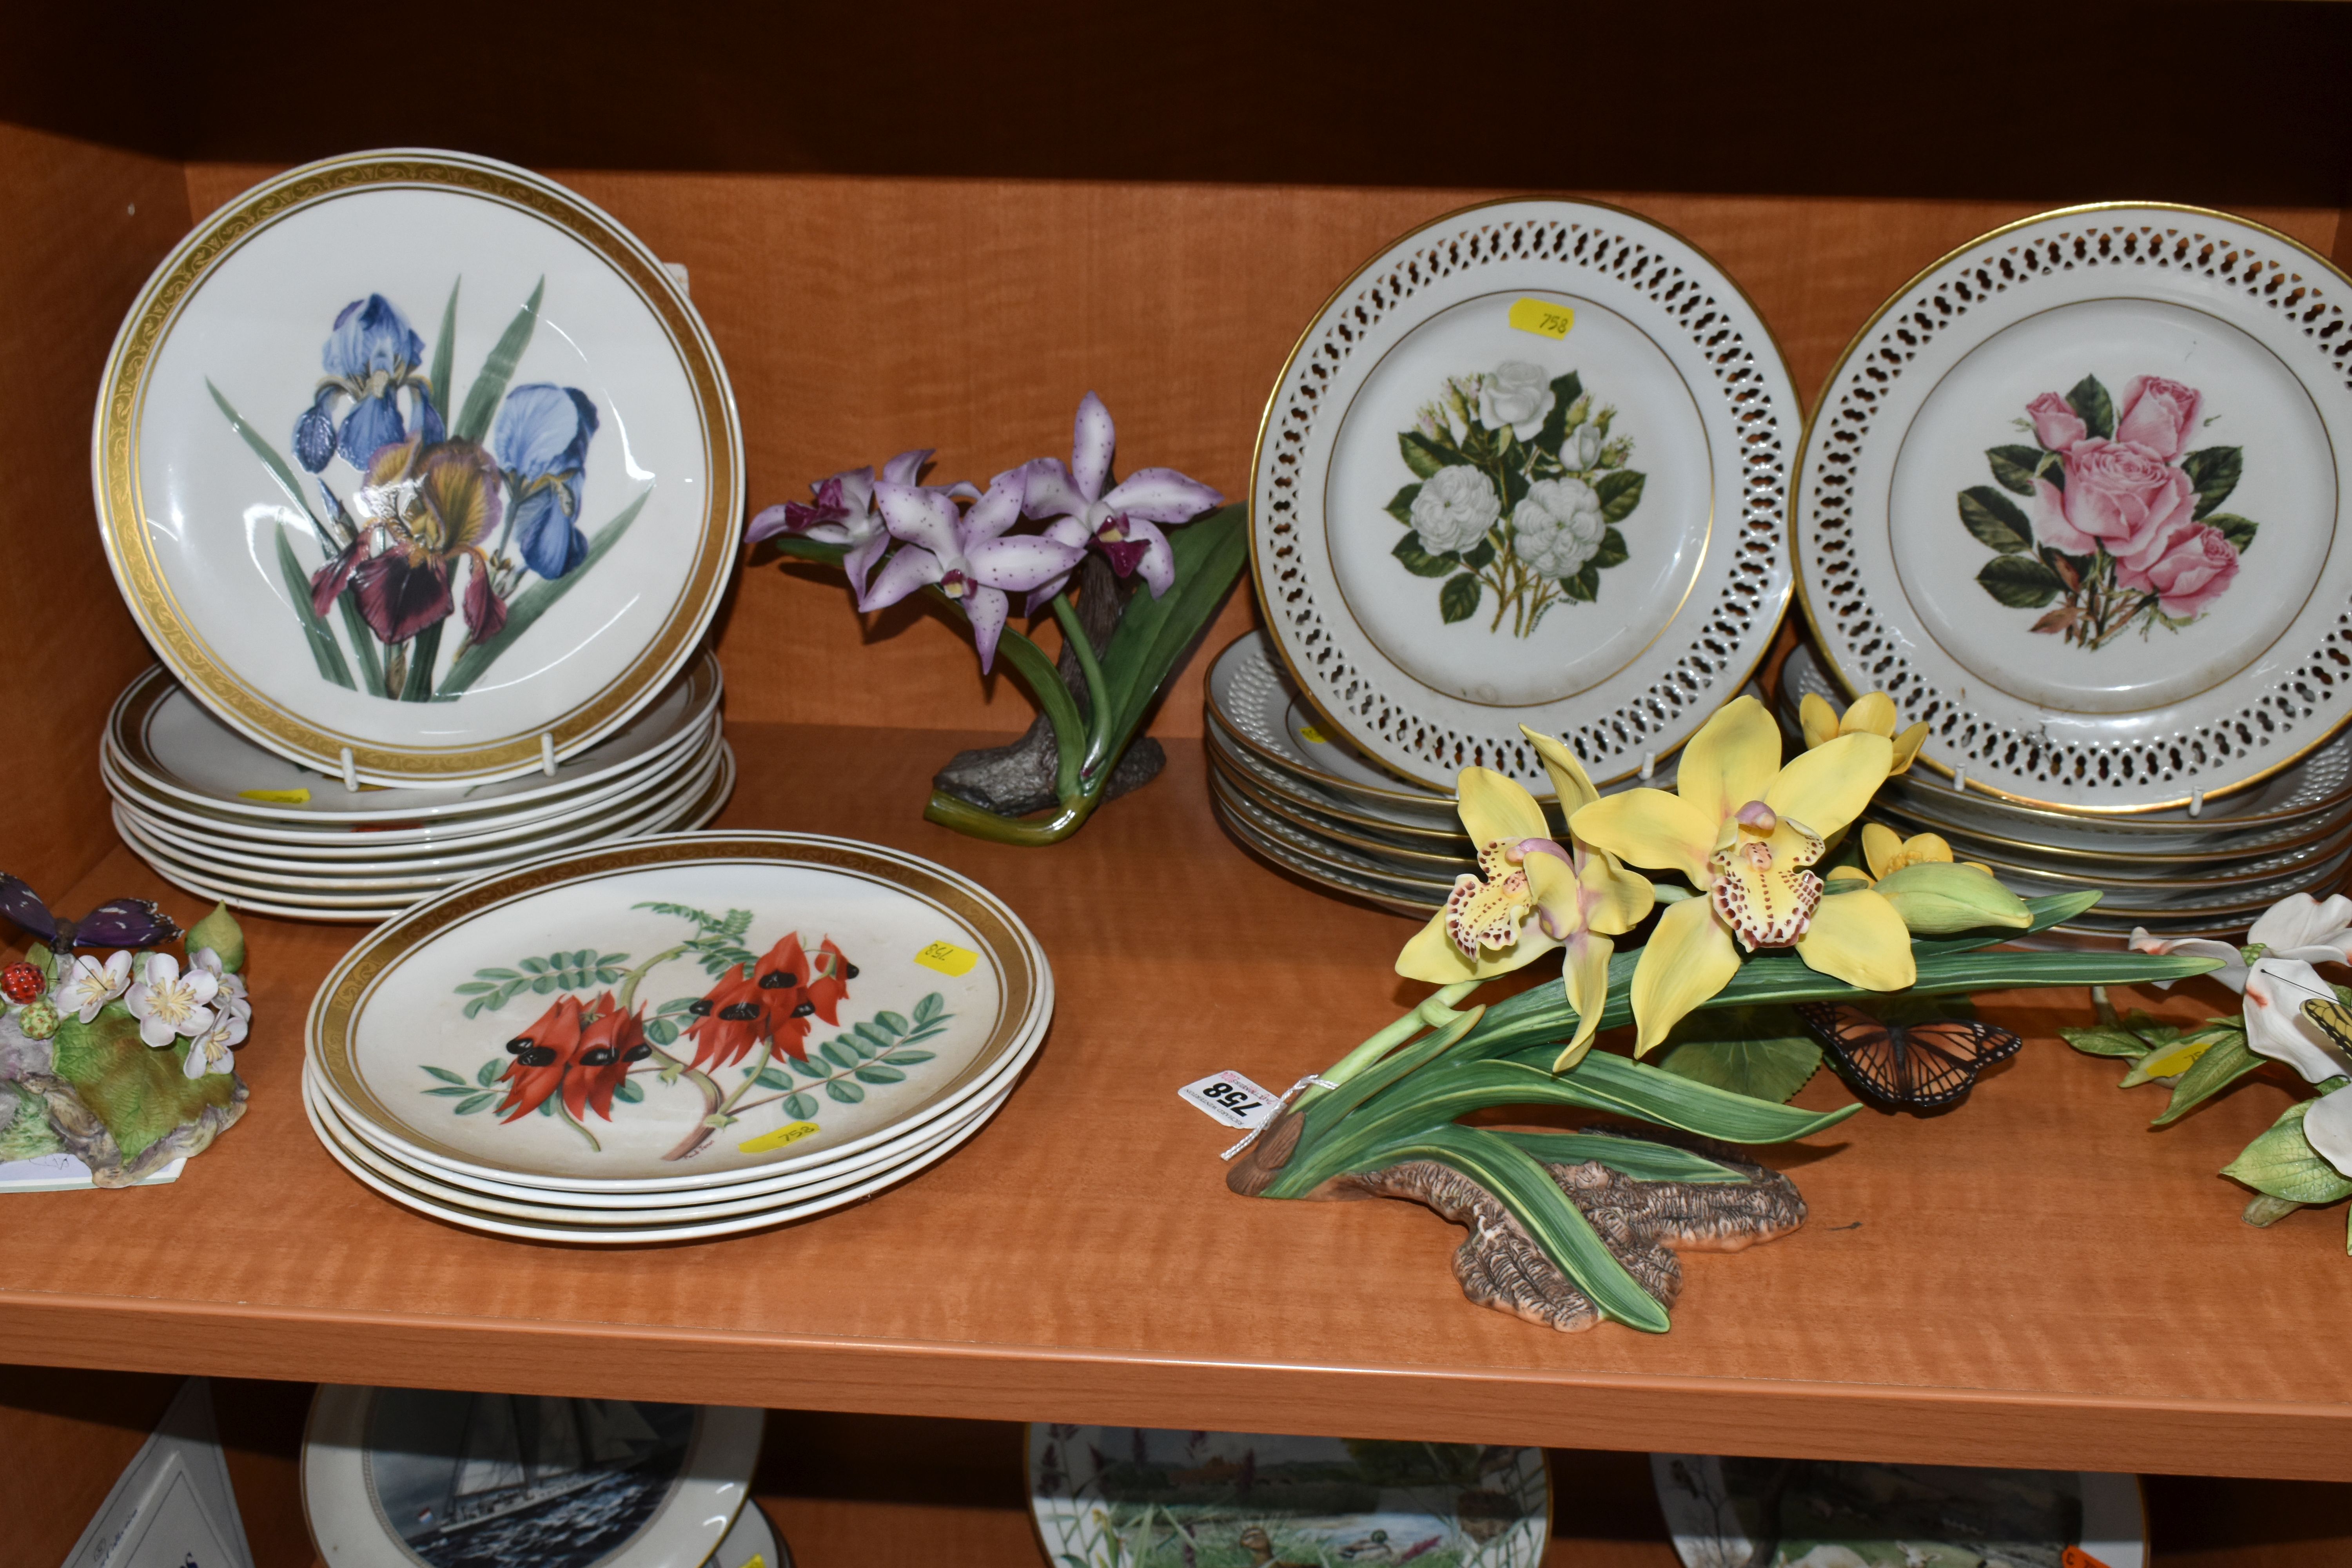 TWO SETS OF TWELVE BOTANICAL COLLECTORS PLATES BY FRANKLIN PORCELAIN AND BING & GRONDAHL FOR DANBURY